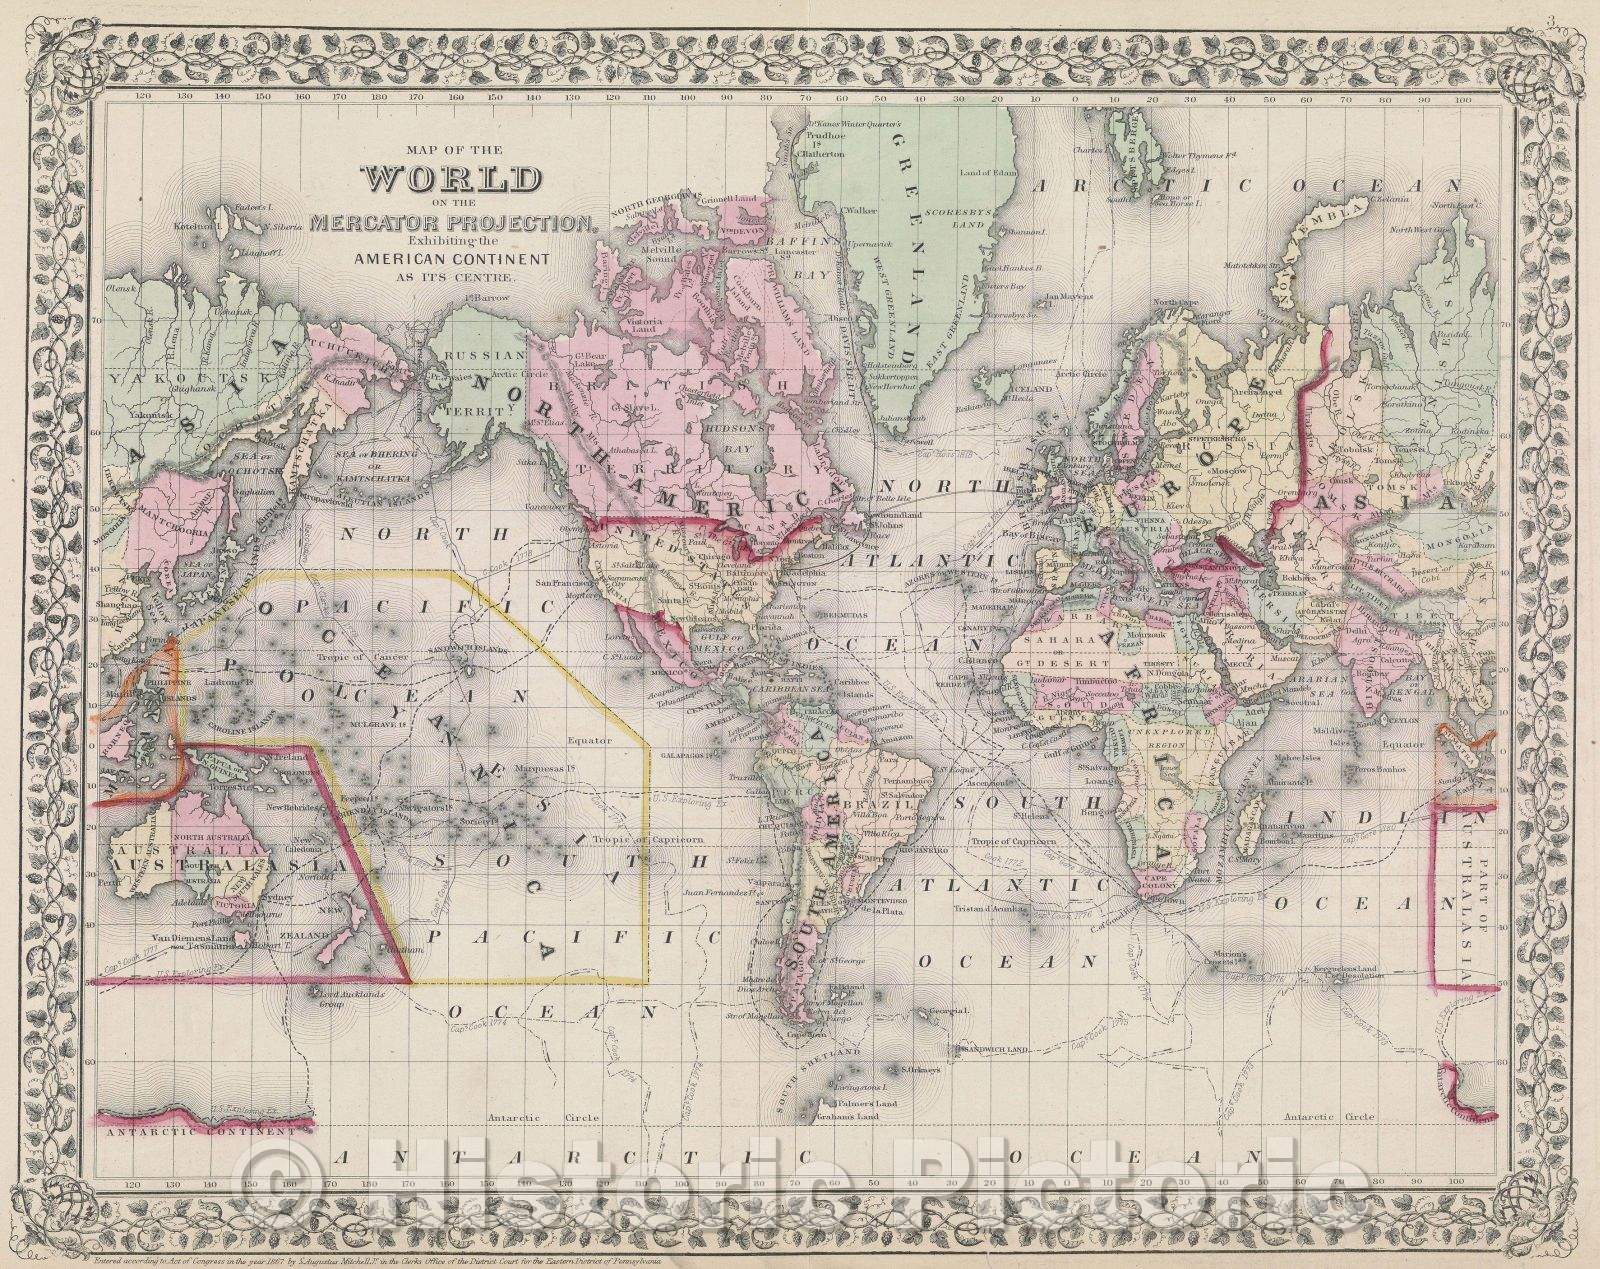 Historic Map : Map of the World on the Mercator Projection Exhibiting the American Continent as its Centre, 1867 , Vintage Wall Art